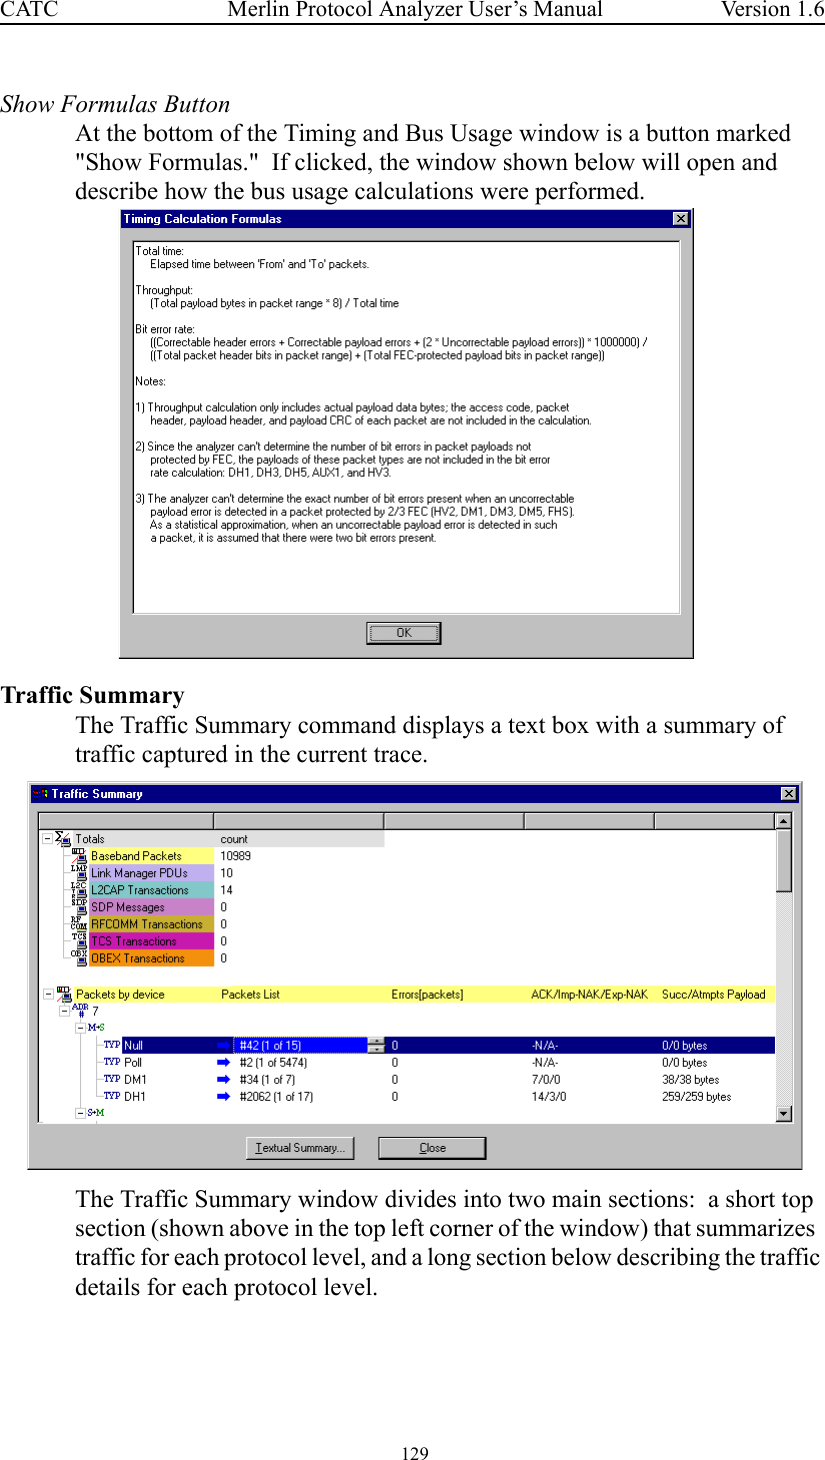  129 Merlin Protocol Analyzer User’s ManualCATC Version 1.6Show Formulas ButtonAt the bottom of the Timing and Bus Usage window is a button marked &quot;Show Formulas.&quot;  If clicked, the window shown below will open and  describe how the bus usage calculations were performed.Traffic SummaryThe Traffic Summary command displays a text box with a summary of traffic captured in the current trace.The Traffic Summary window divides into two main sections:  a short top section (shown above in the top left corner of the window) that summarizes  traffic for each protocol level, and a long section below describing the traffic details for each protocol level.  